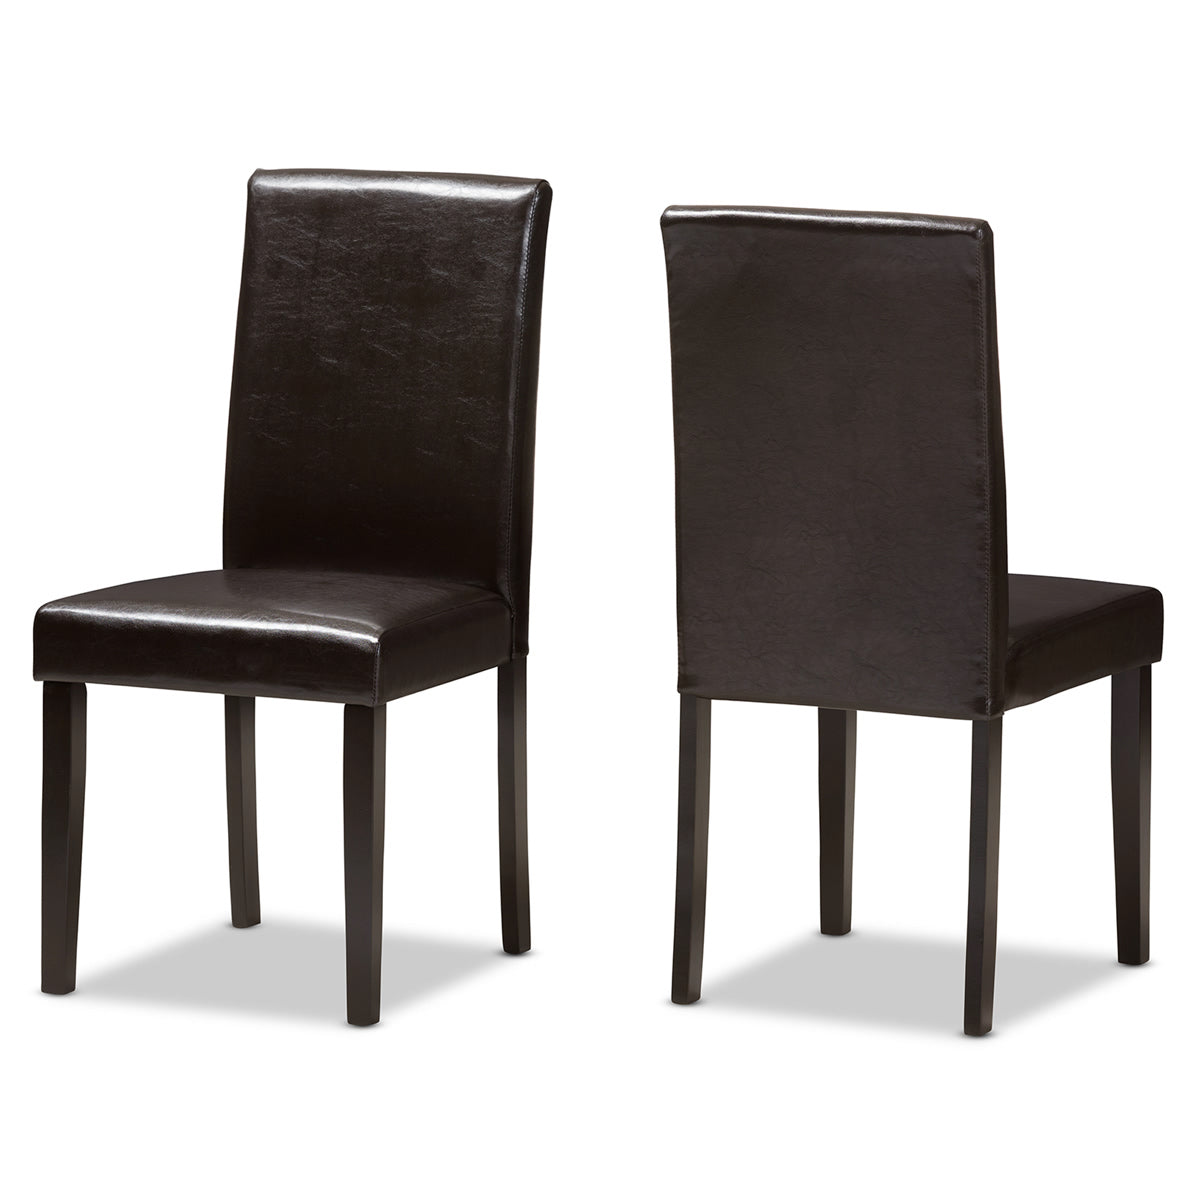 Baxton Studio Mia Modern and Contemporary Dark Brown Faux Leather Upholstered Dining Chair (Set of 2) Baxton Studio-dining chair-Minimal And Modern - 1